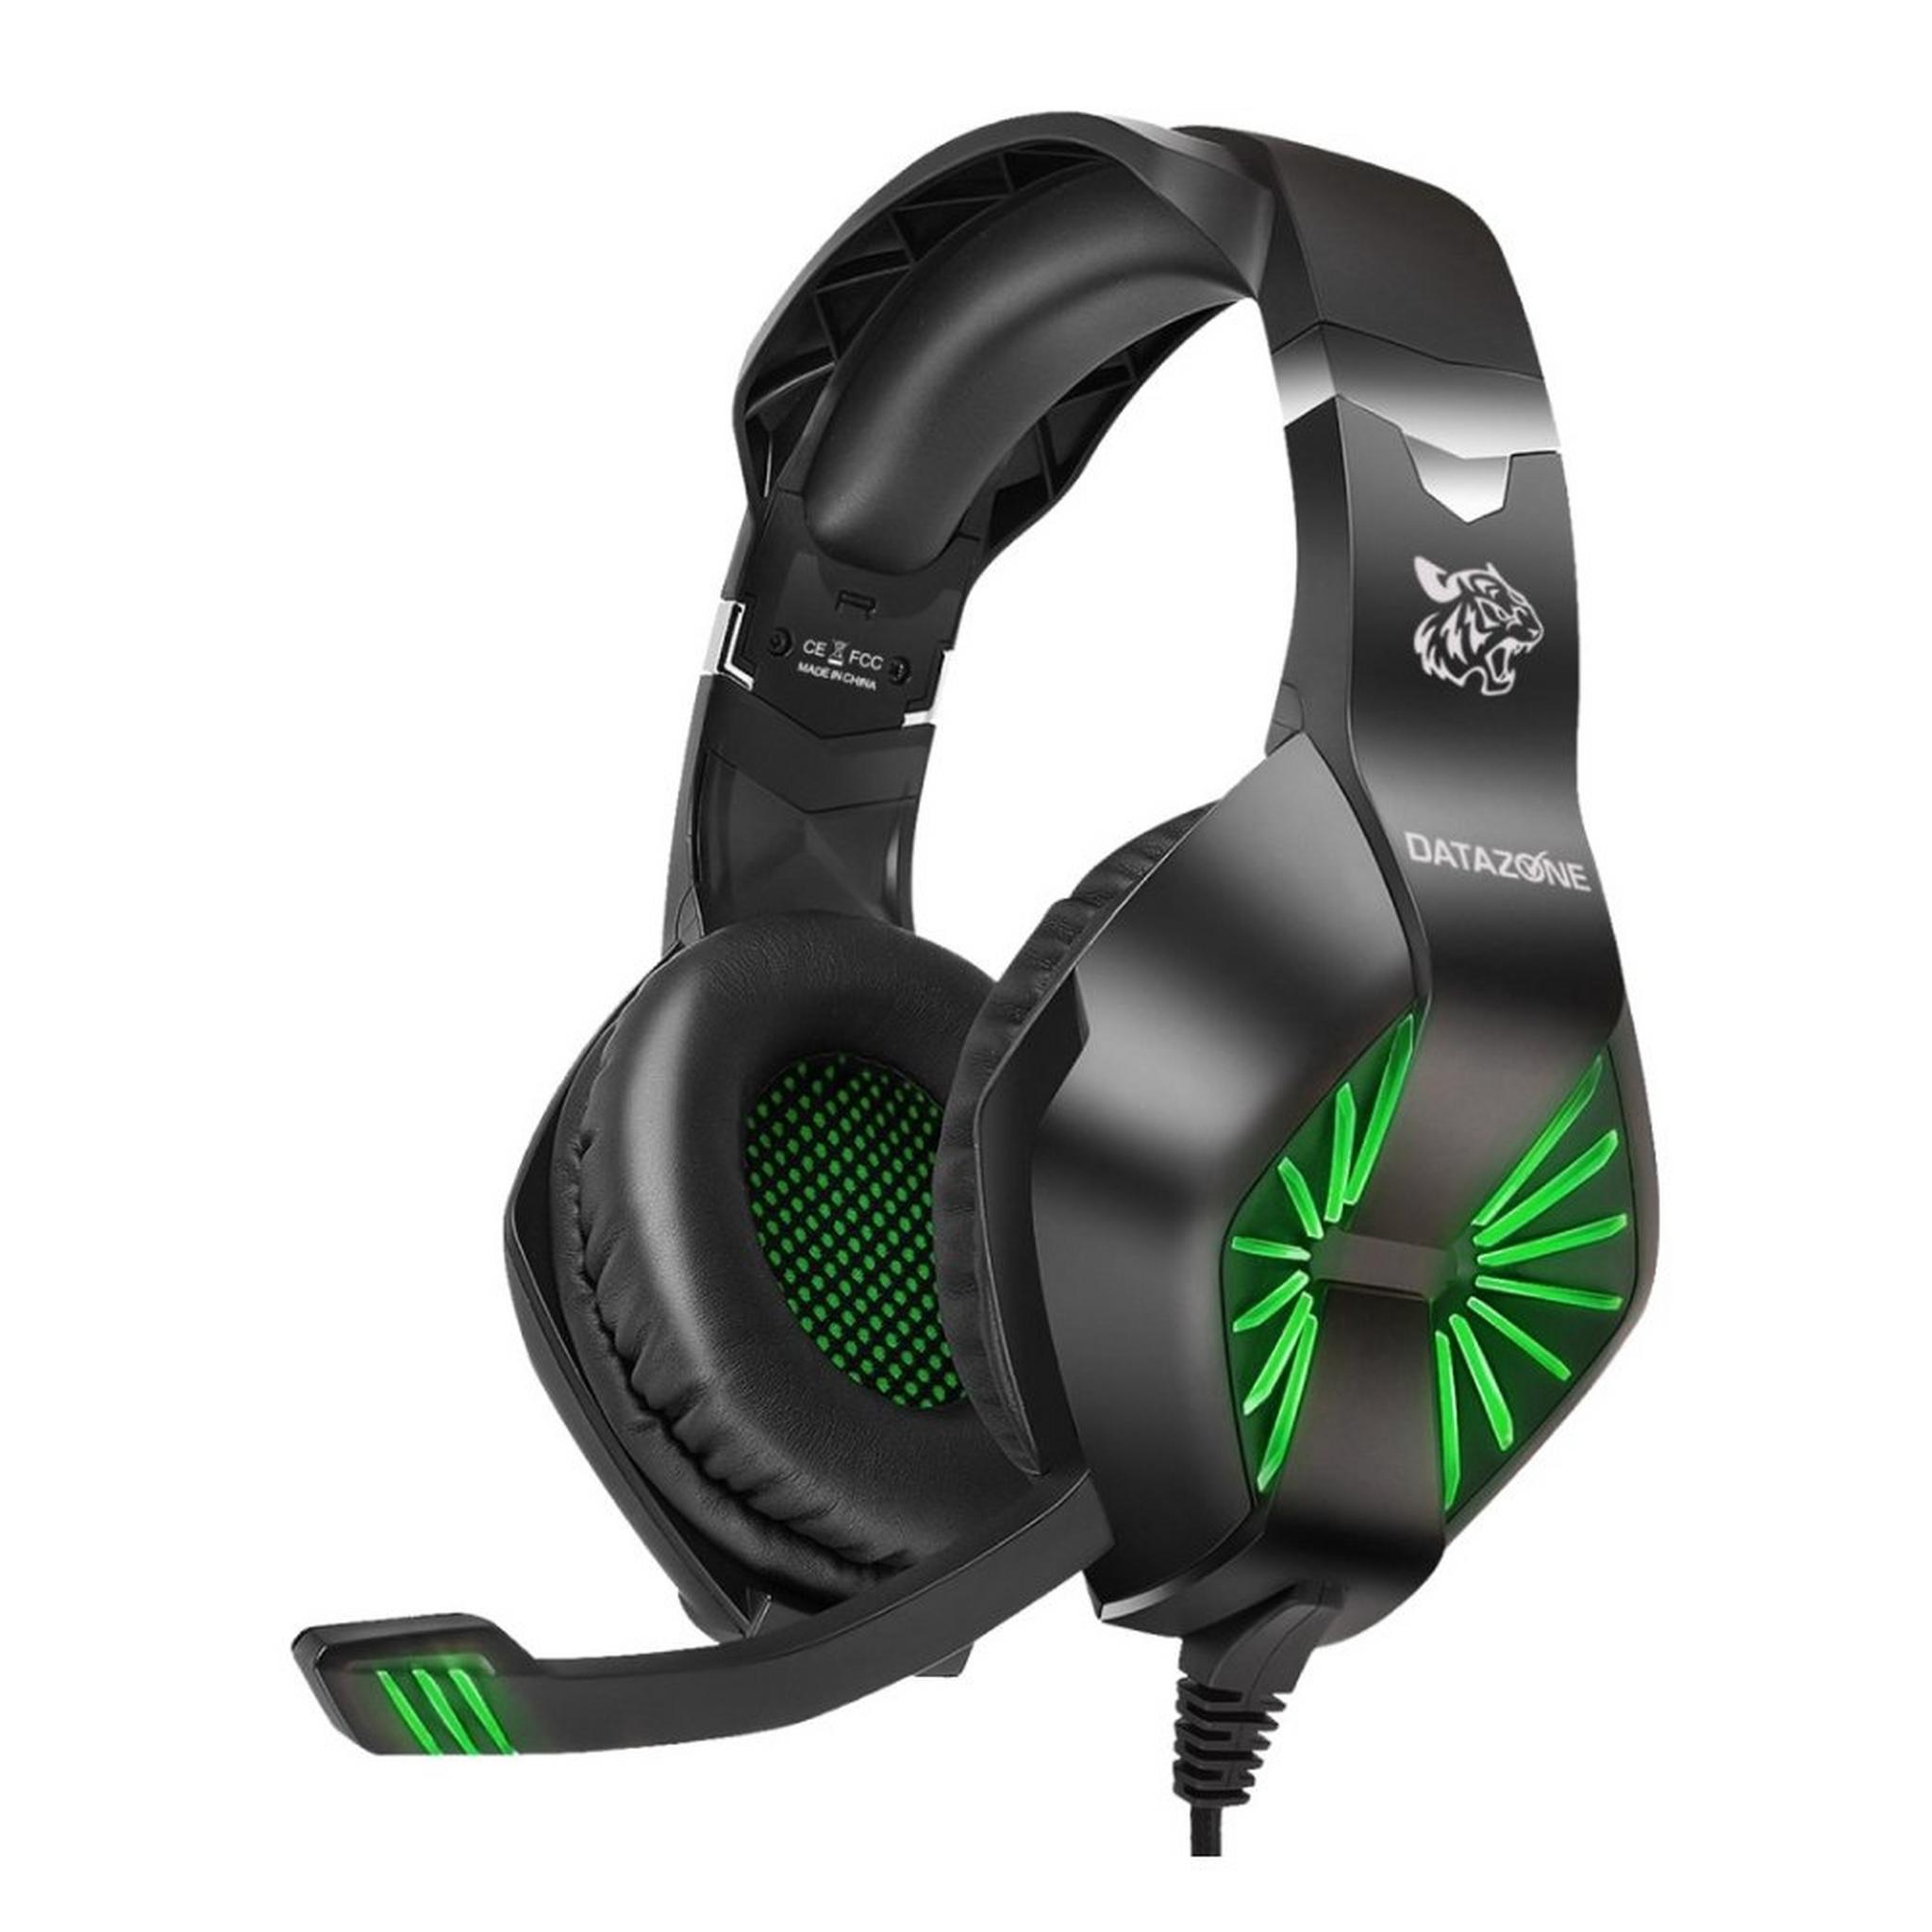 Datazone G1500 Over Ear Wired Gaming Headset for PS4 and PC - Green